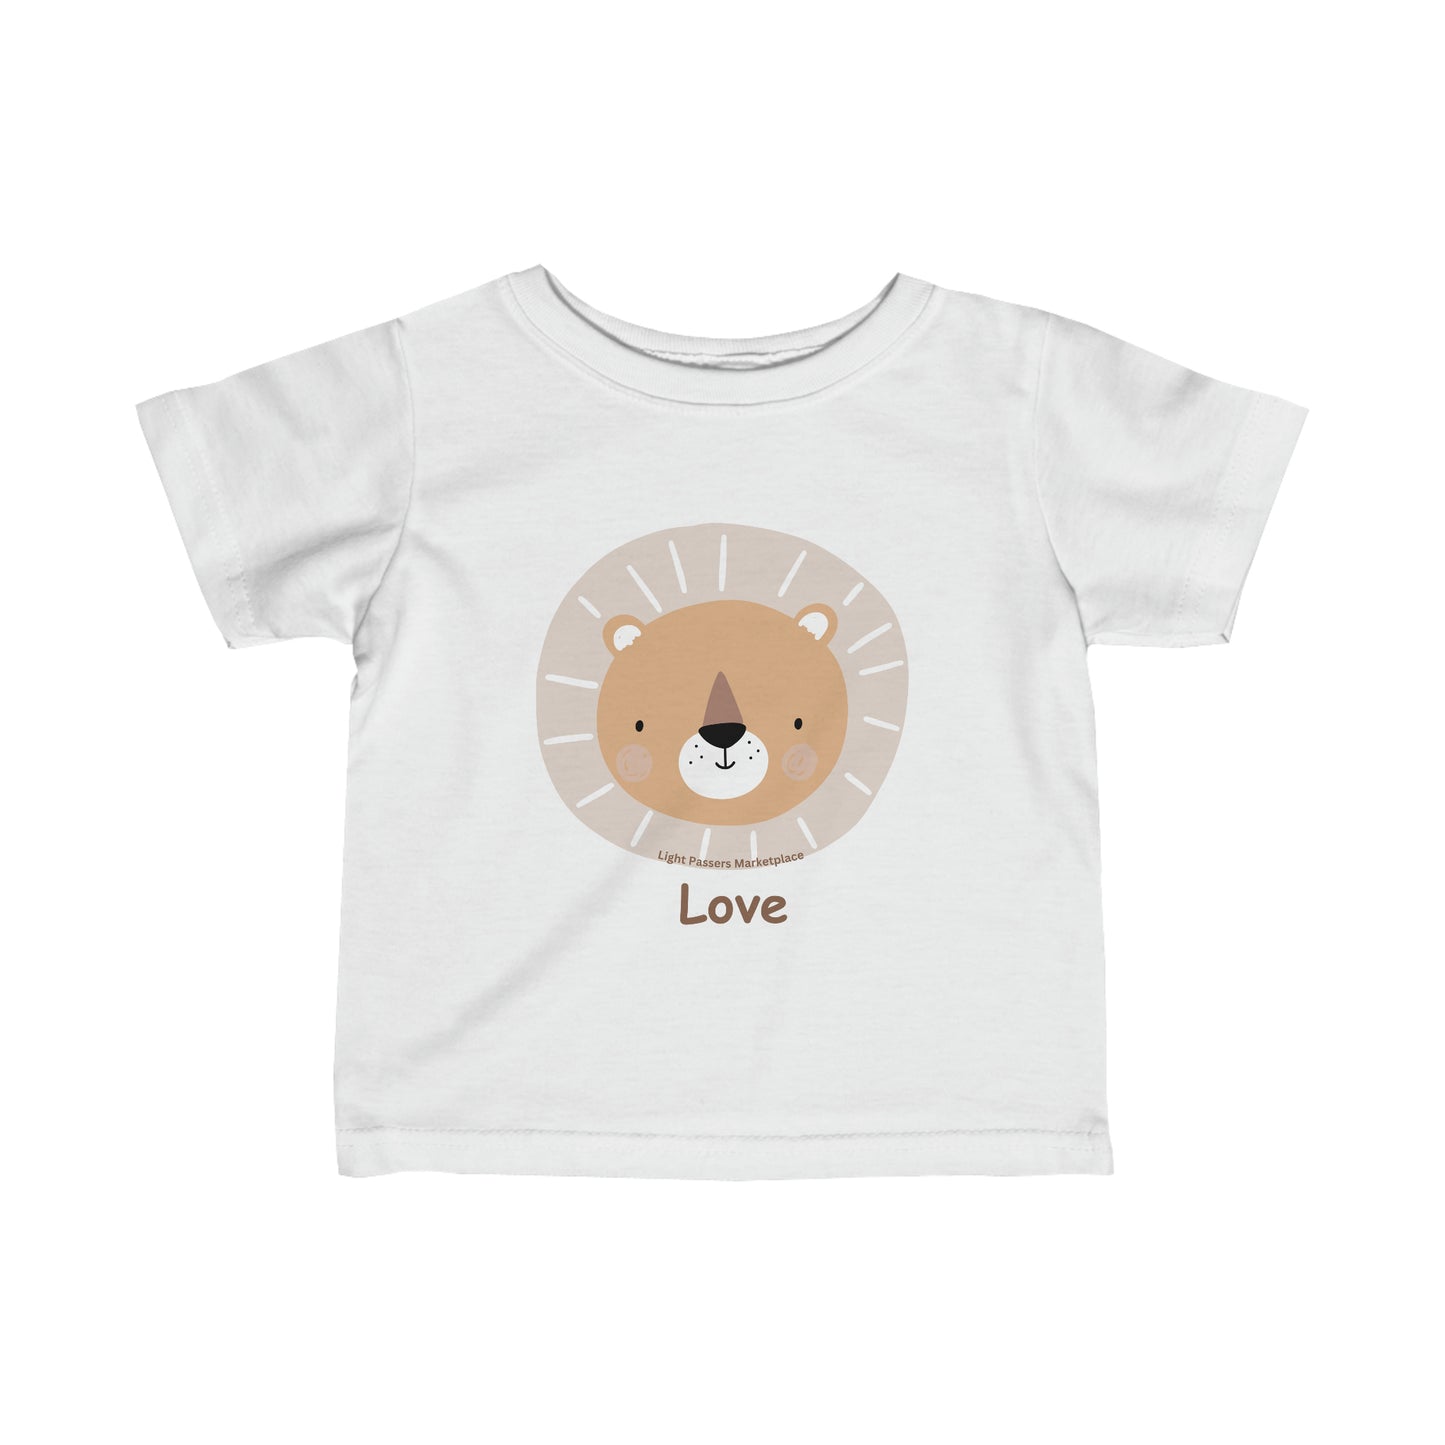 Light Passers Marketplace Lion Love Baby T-shirt Inspirational Messages, Simple Messages, Mental Health